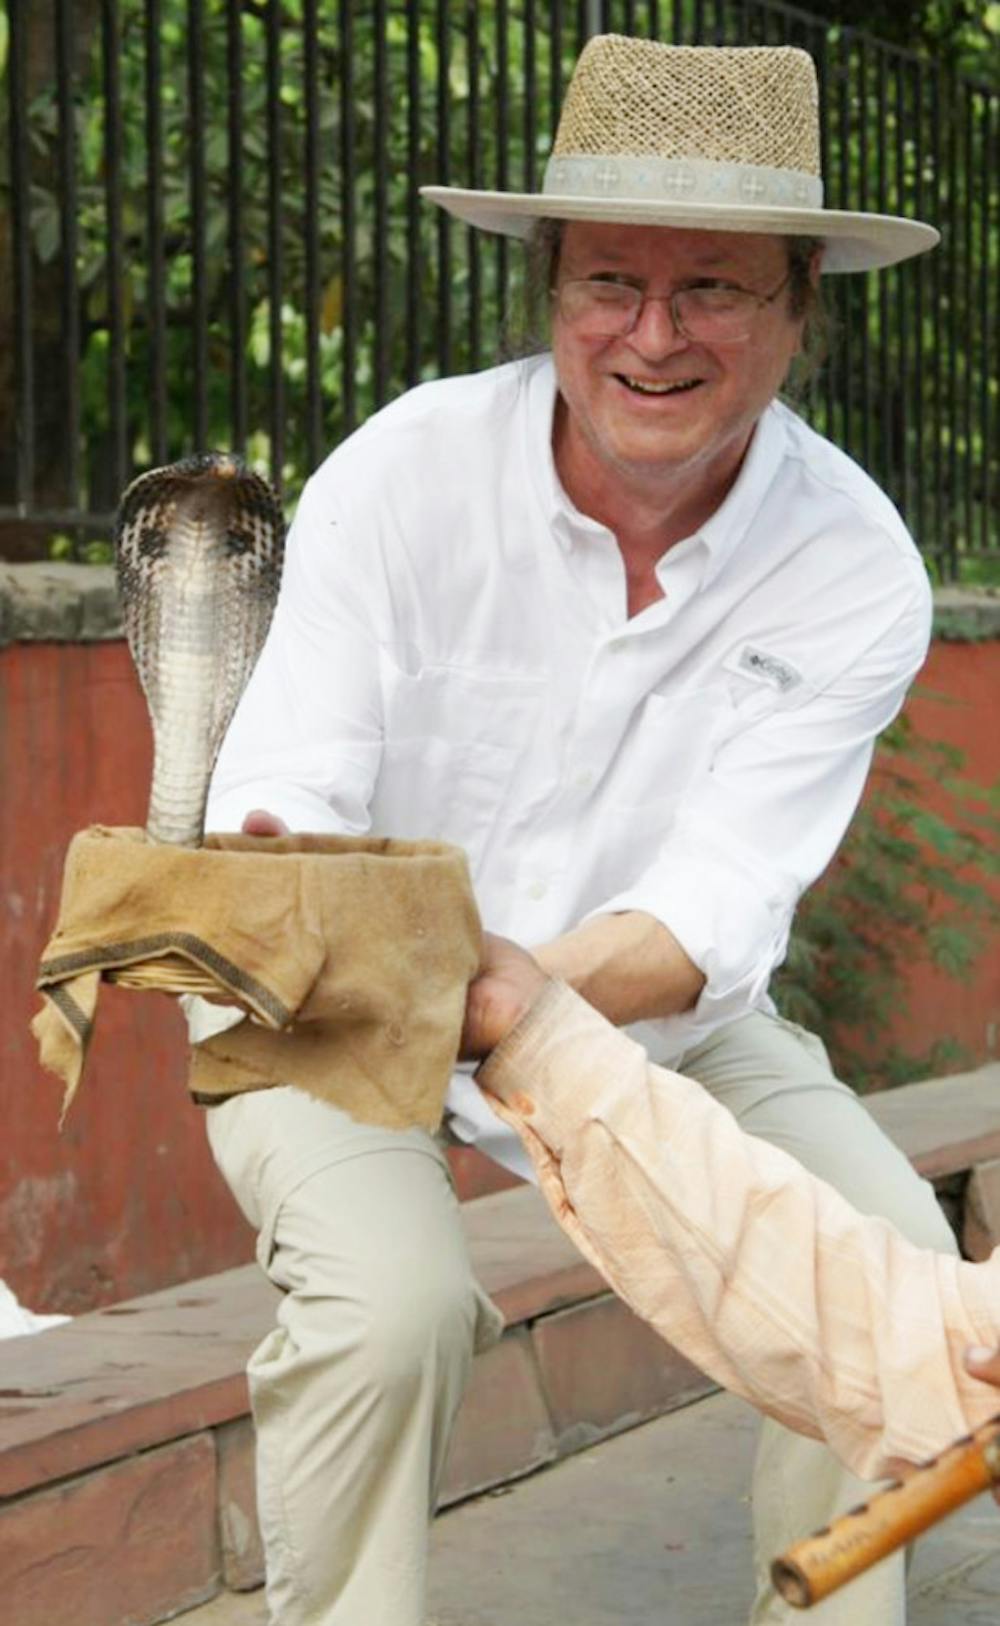 <p>Gar Hoflund plays with a cobra outside of the Memorial to Gandhi in Delhi, India.</p>